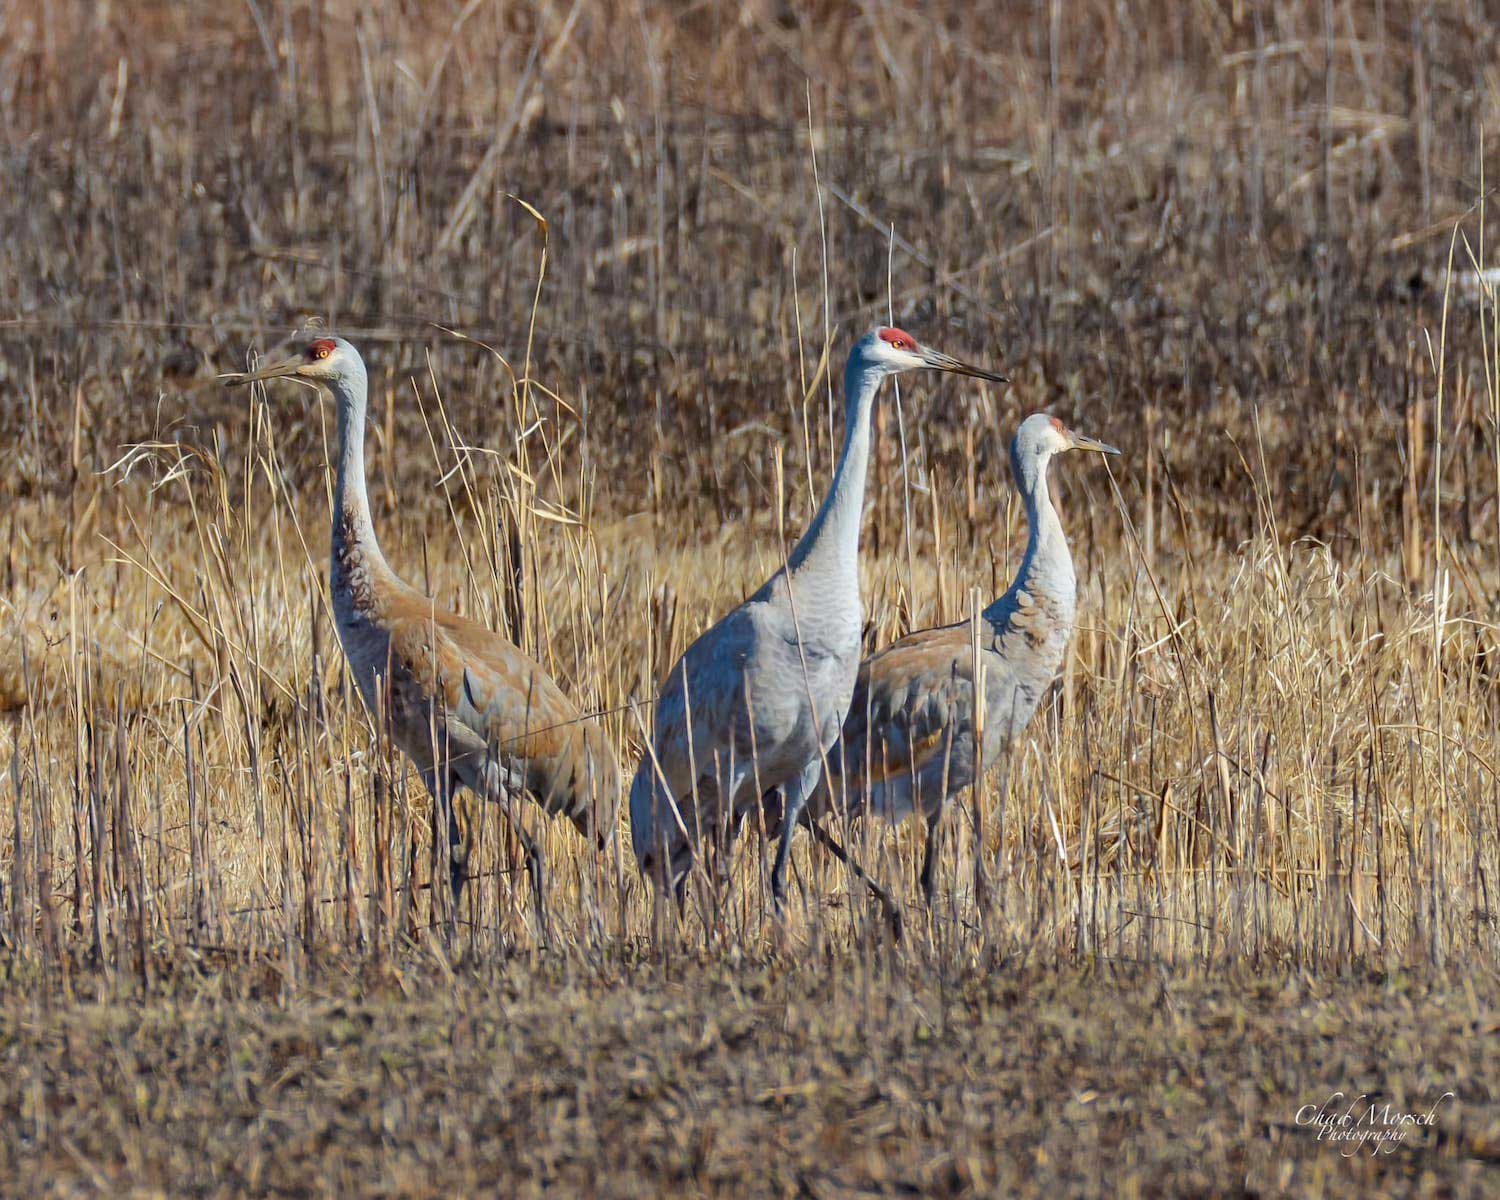 Thee sandhill cranes standing in dried grasses.